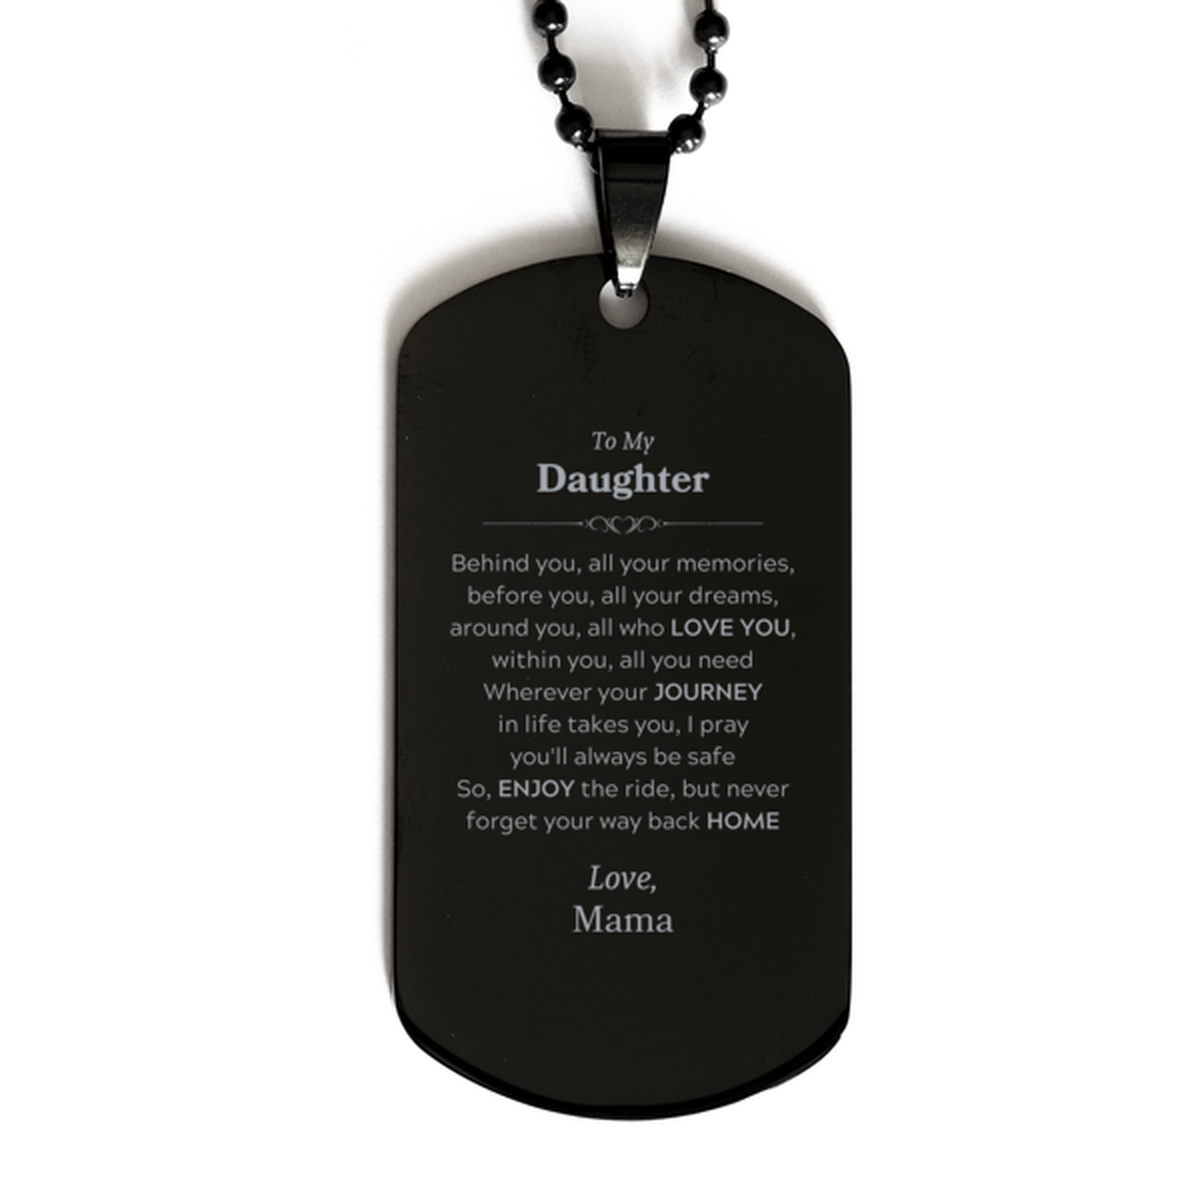 To My Daughter Graduation Gifts from Mama, Daughter Black Dog Tag Christmas Birthday Gifts for Daughter Behind you, all your memories, before you, all your dreams. Love, Mama